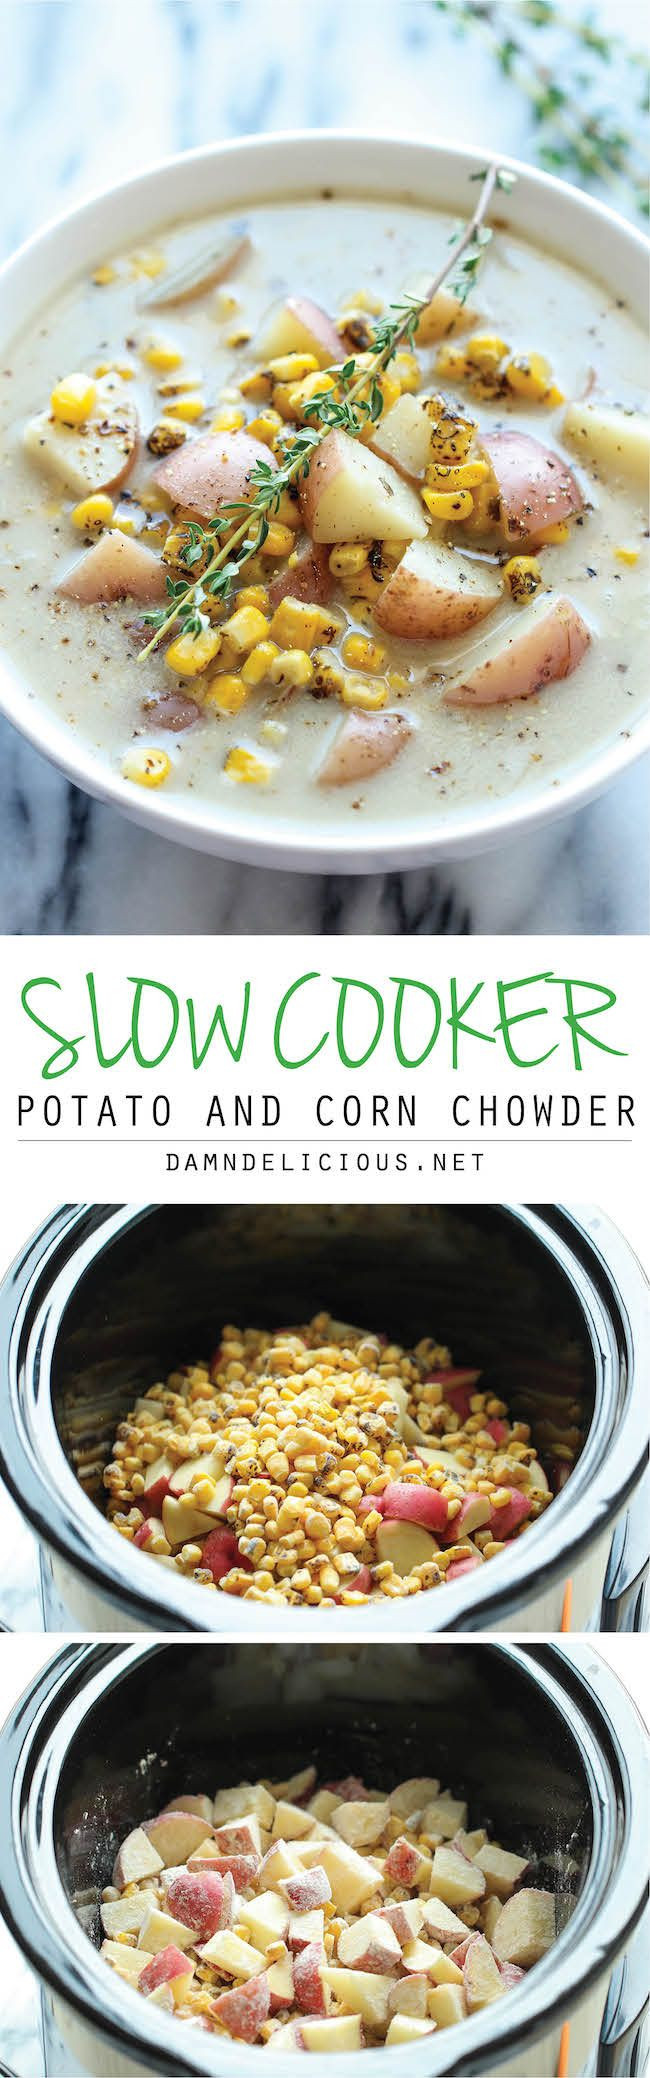 Slow Cooker Corn Chowder Vegetarian
 354 best images about Crockpot Soups Freezer and